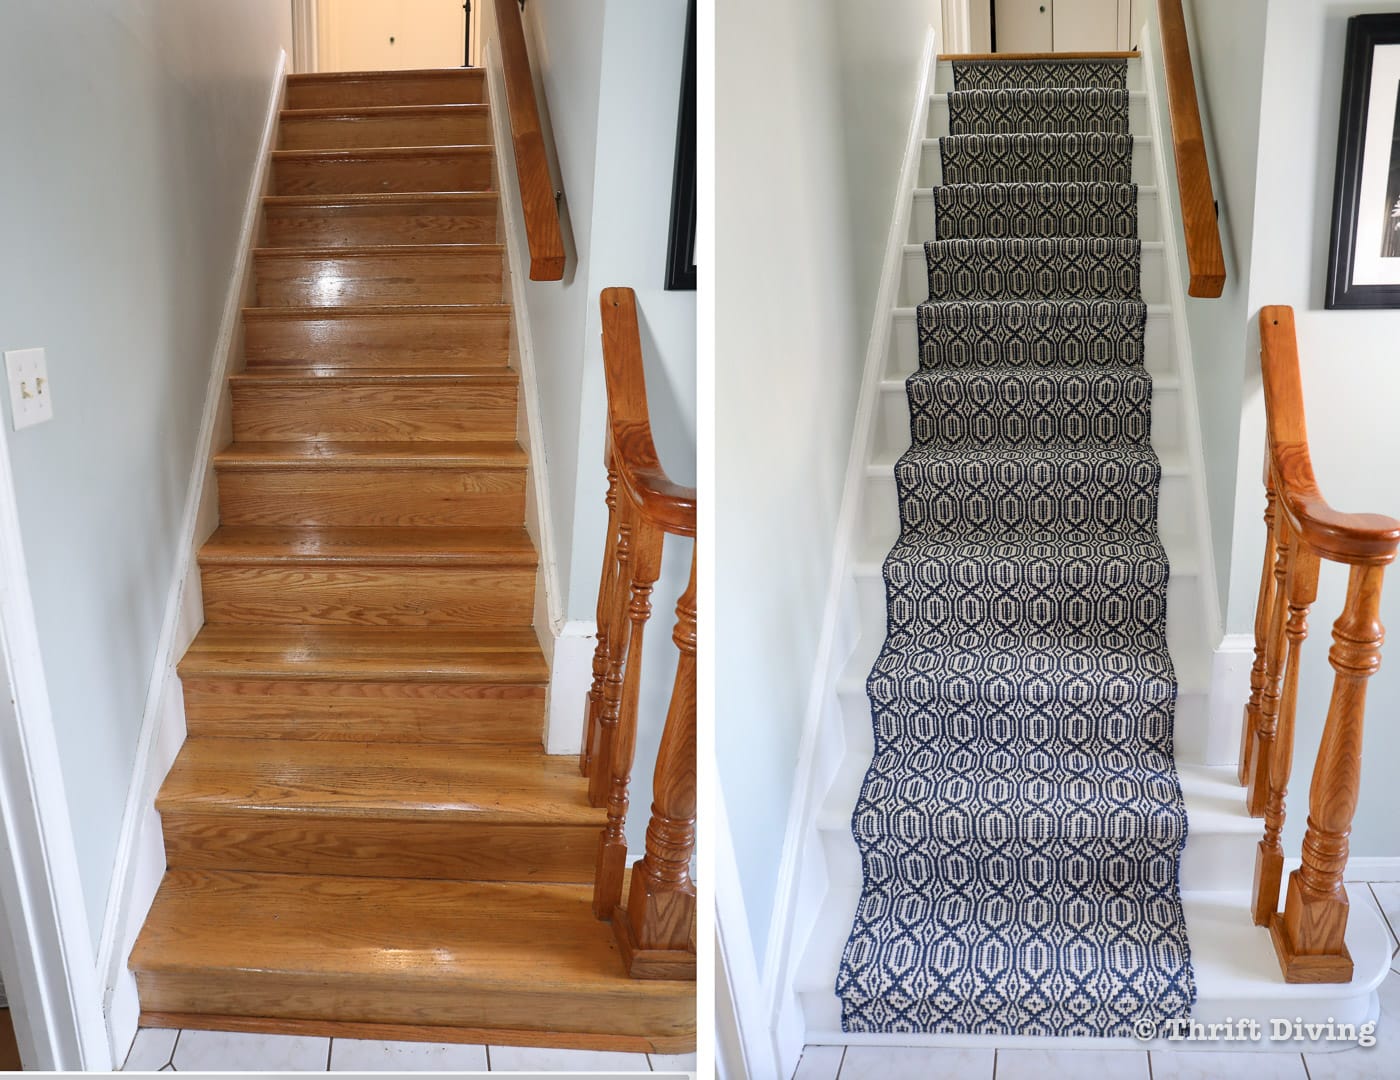 How to Install a Stair Runner - See the BEFORE and AFTER - Bare golden oak bare stairs BEFORE and painted stairs AFTER with a pretty, modern stair runner. - Thrift Diving